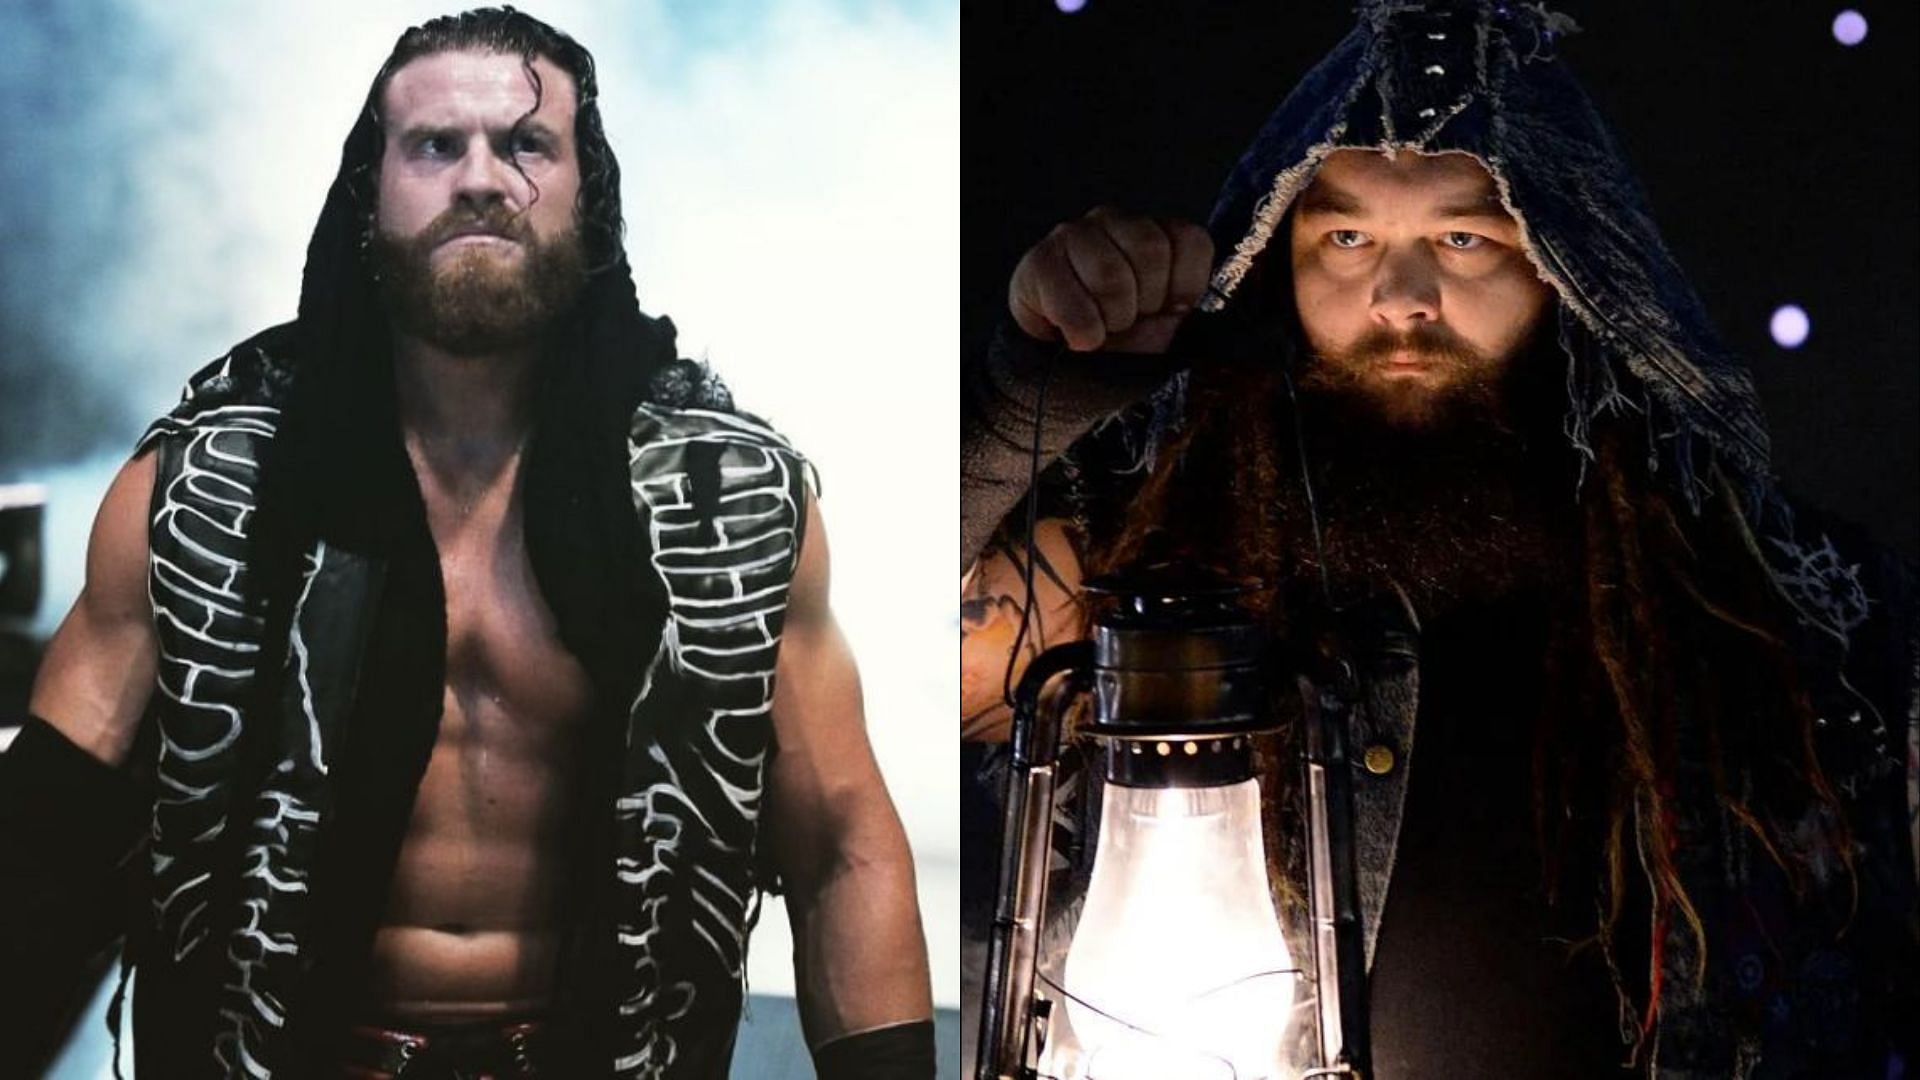 Buddy Matthews (left) paid tribute to Bray Wyatt (right) last night at All In